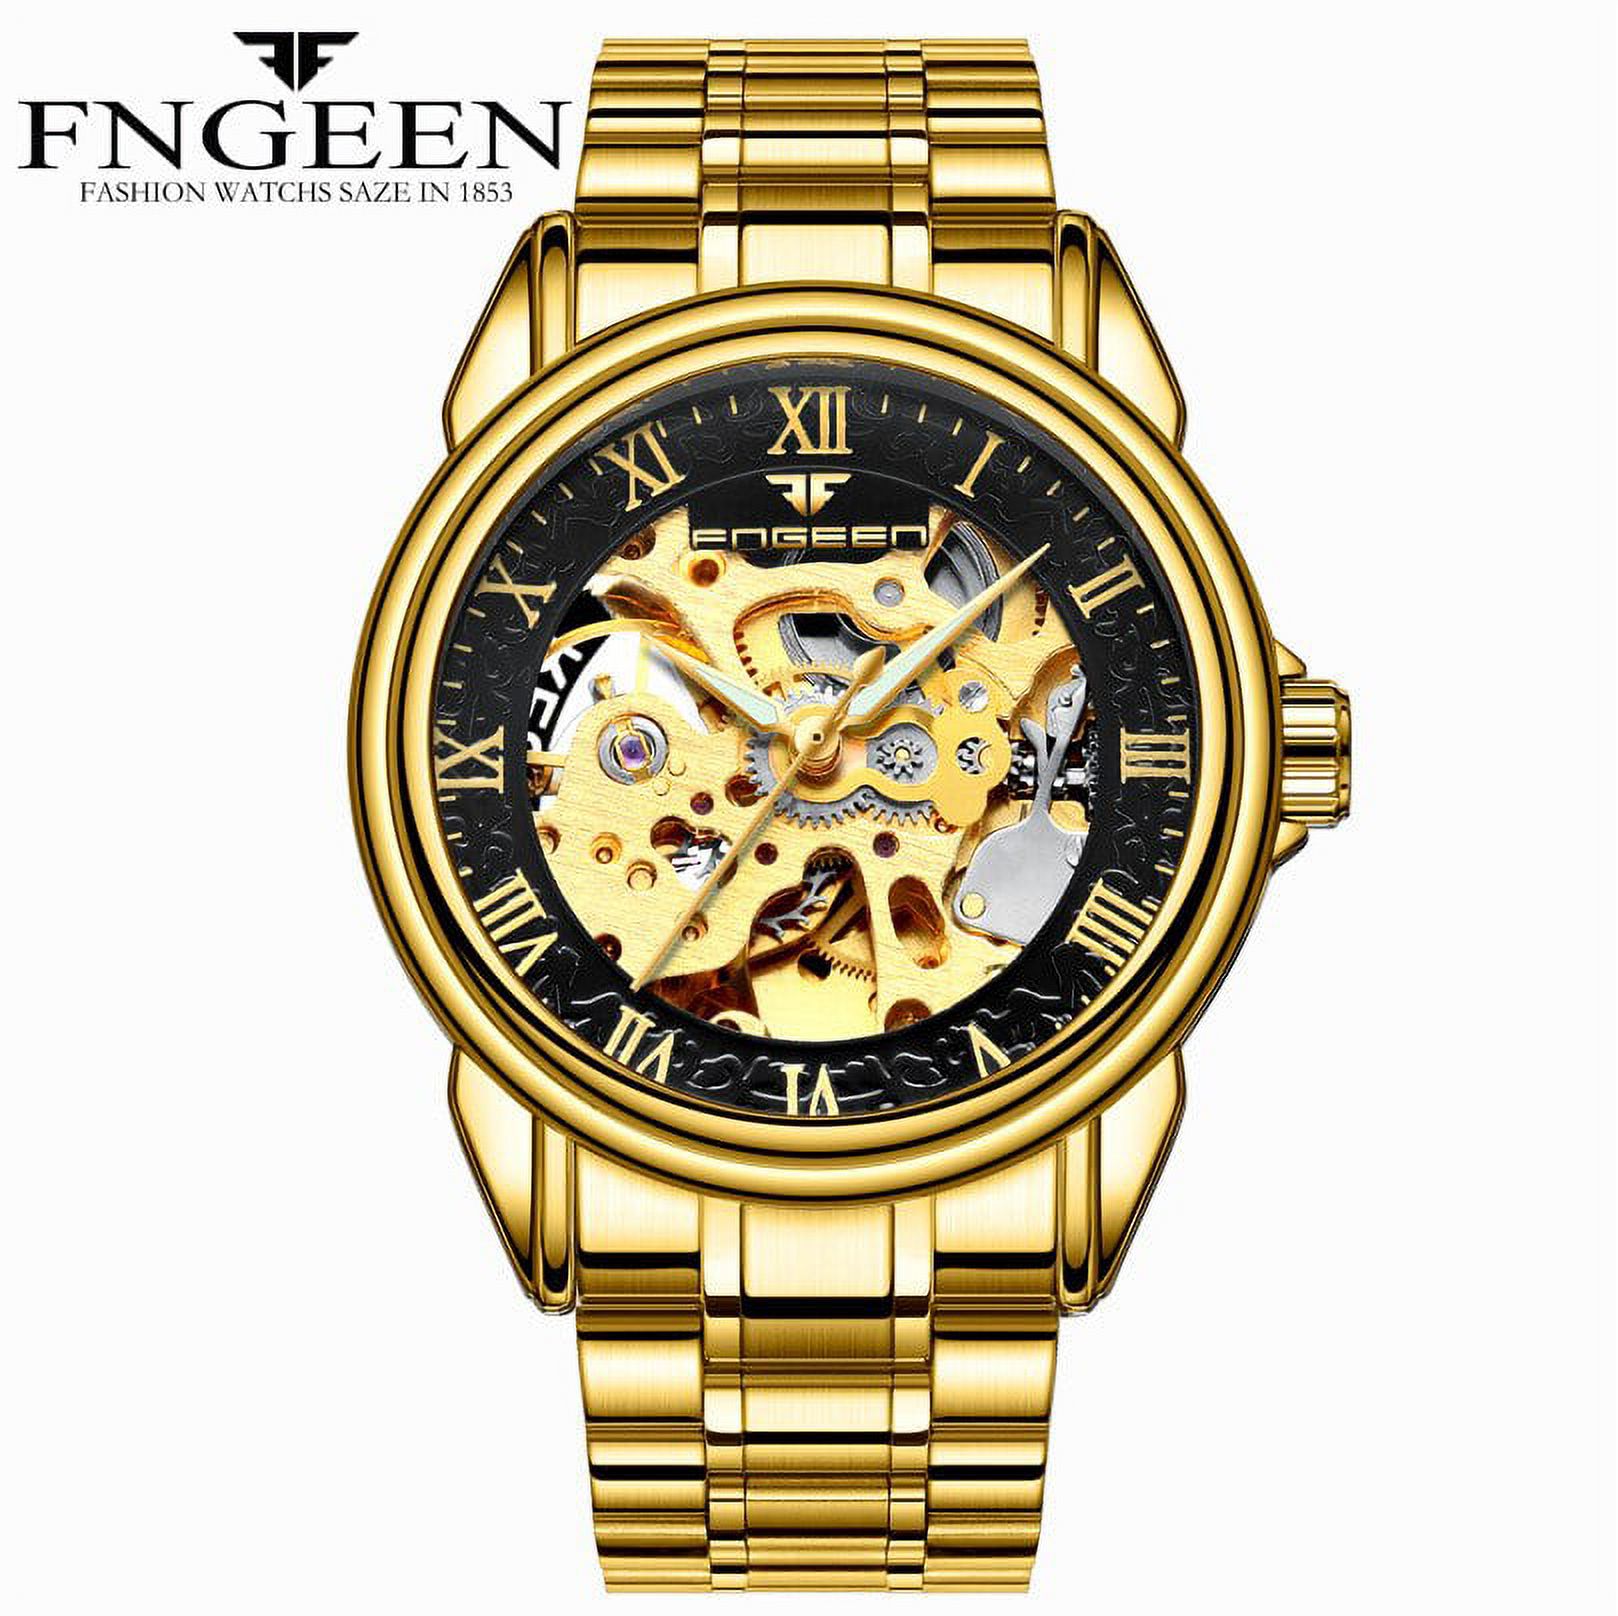 Fngeen Brand Men's Watch Waterproof Fashion Student Men's Watch Double-Sided Hollow Automatic Mechanical Watch - image 1 of 6